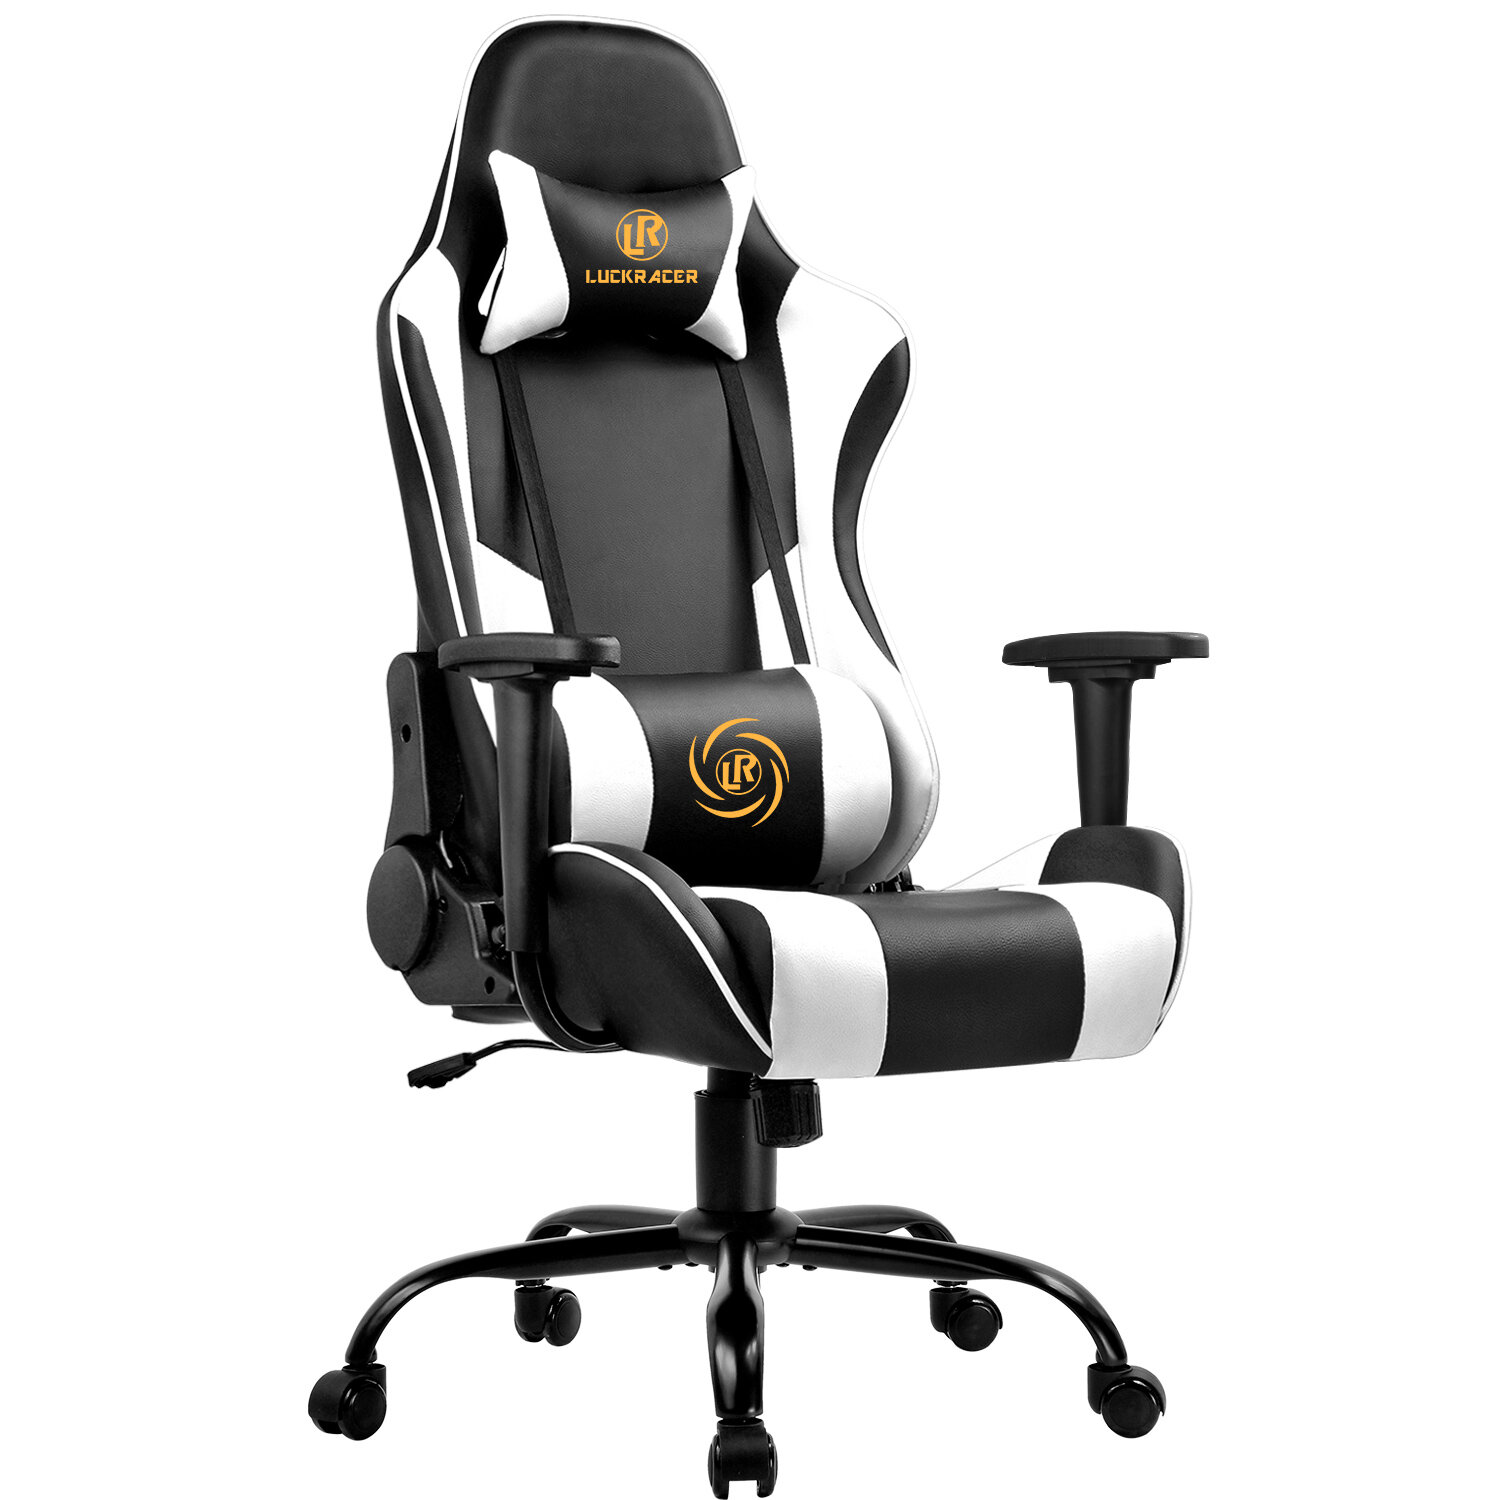 Gtplayer Gaming Chair with Footrest and Ergonomic Lumbar Massage